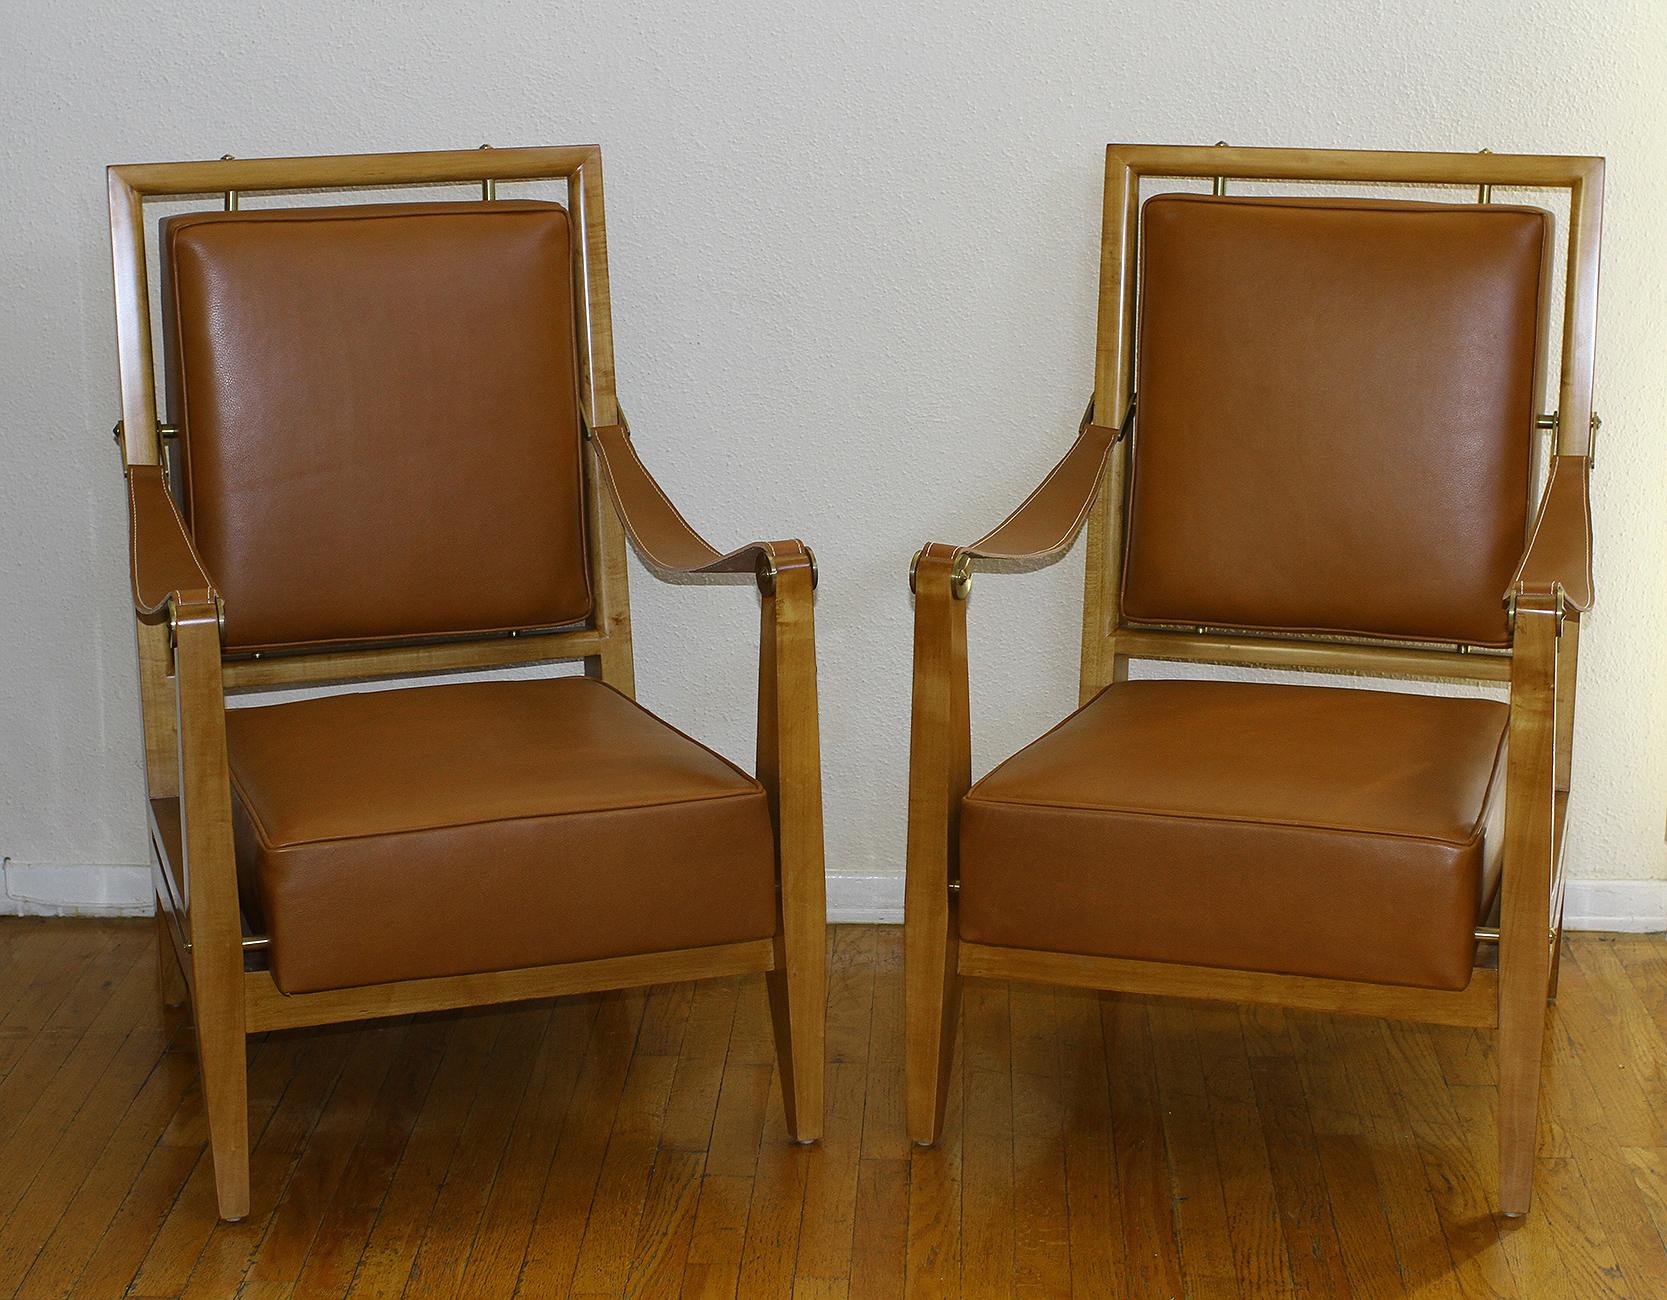 MAXIME OLD (1910 - 1991)

Pair of chairs from the Marhaba Hotel in Morocco, France 1953

Exceptional and extremely rare pair of Maxime Old chairs from the Marhaba Hotel in Morocco.

The chairs has been made by Maxime Old in France in 1953 for this